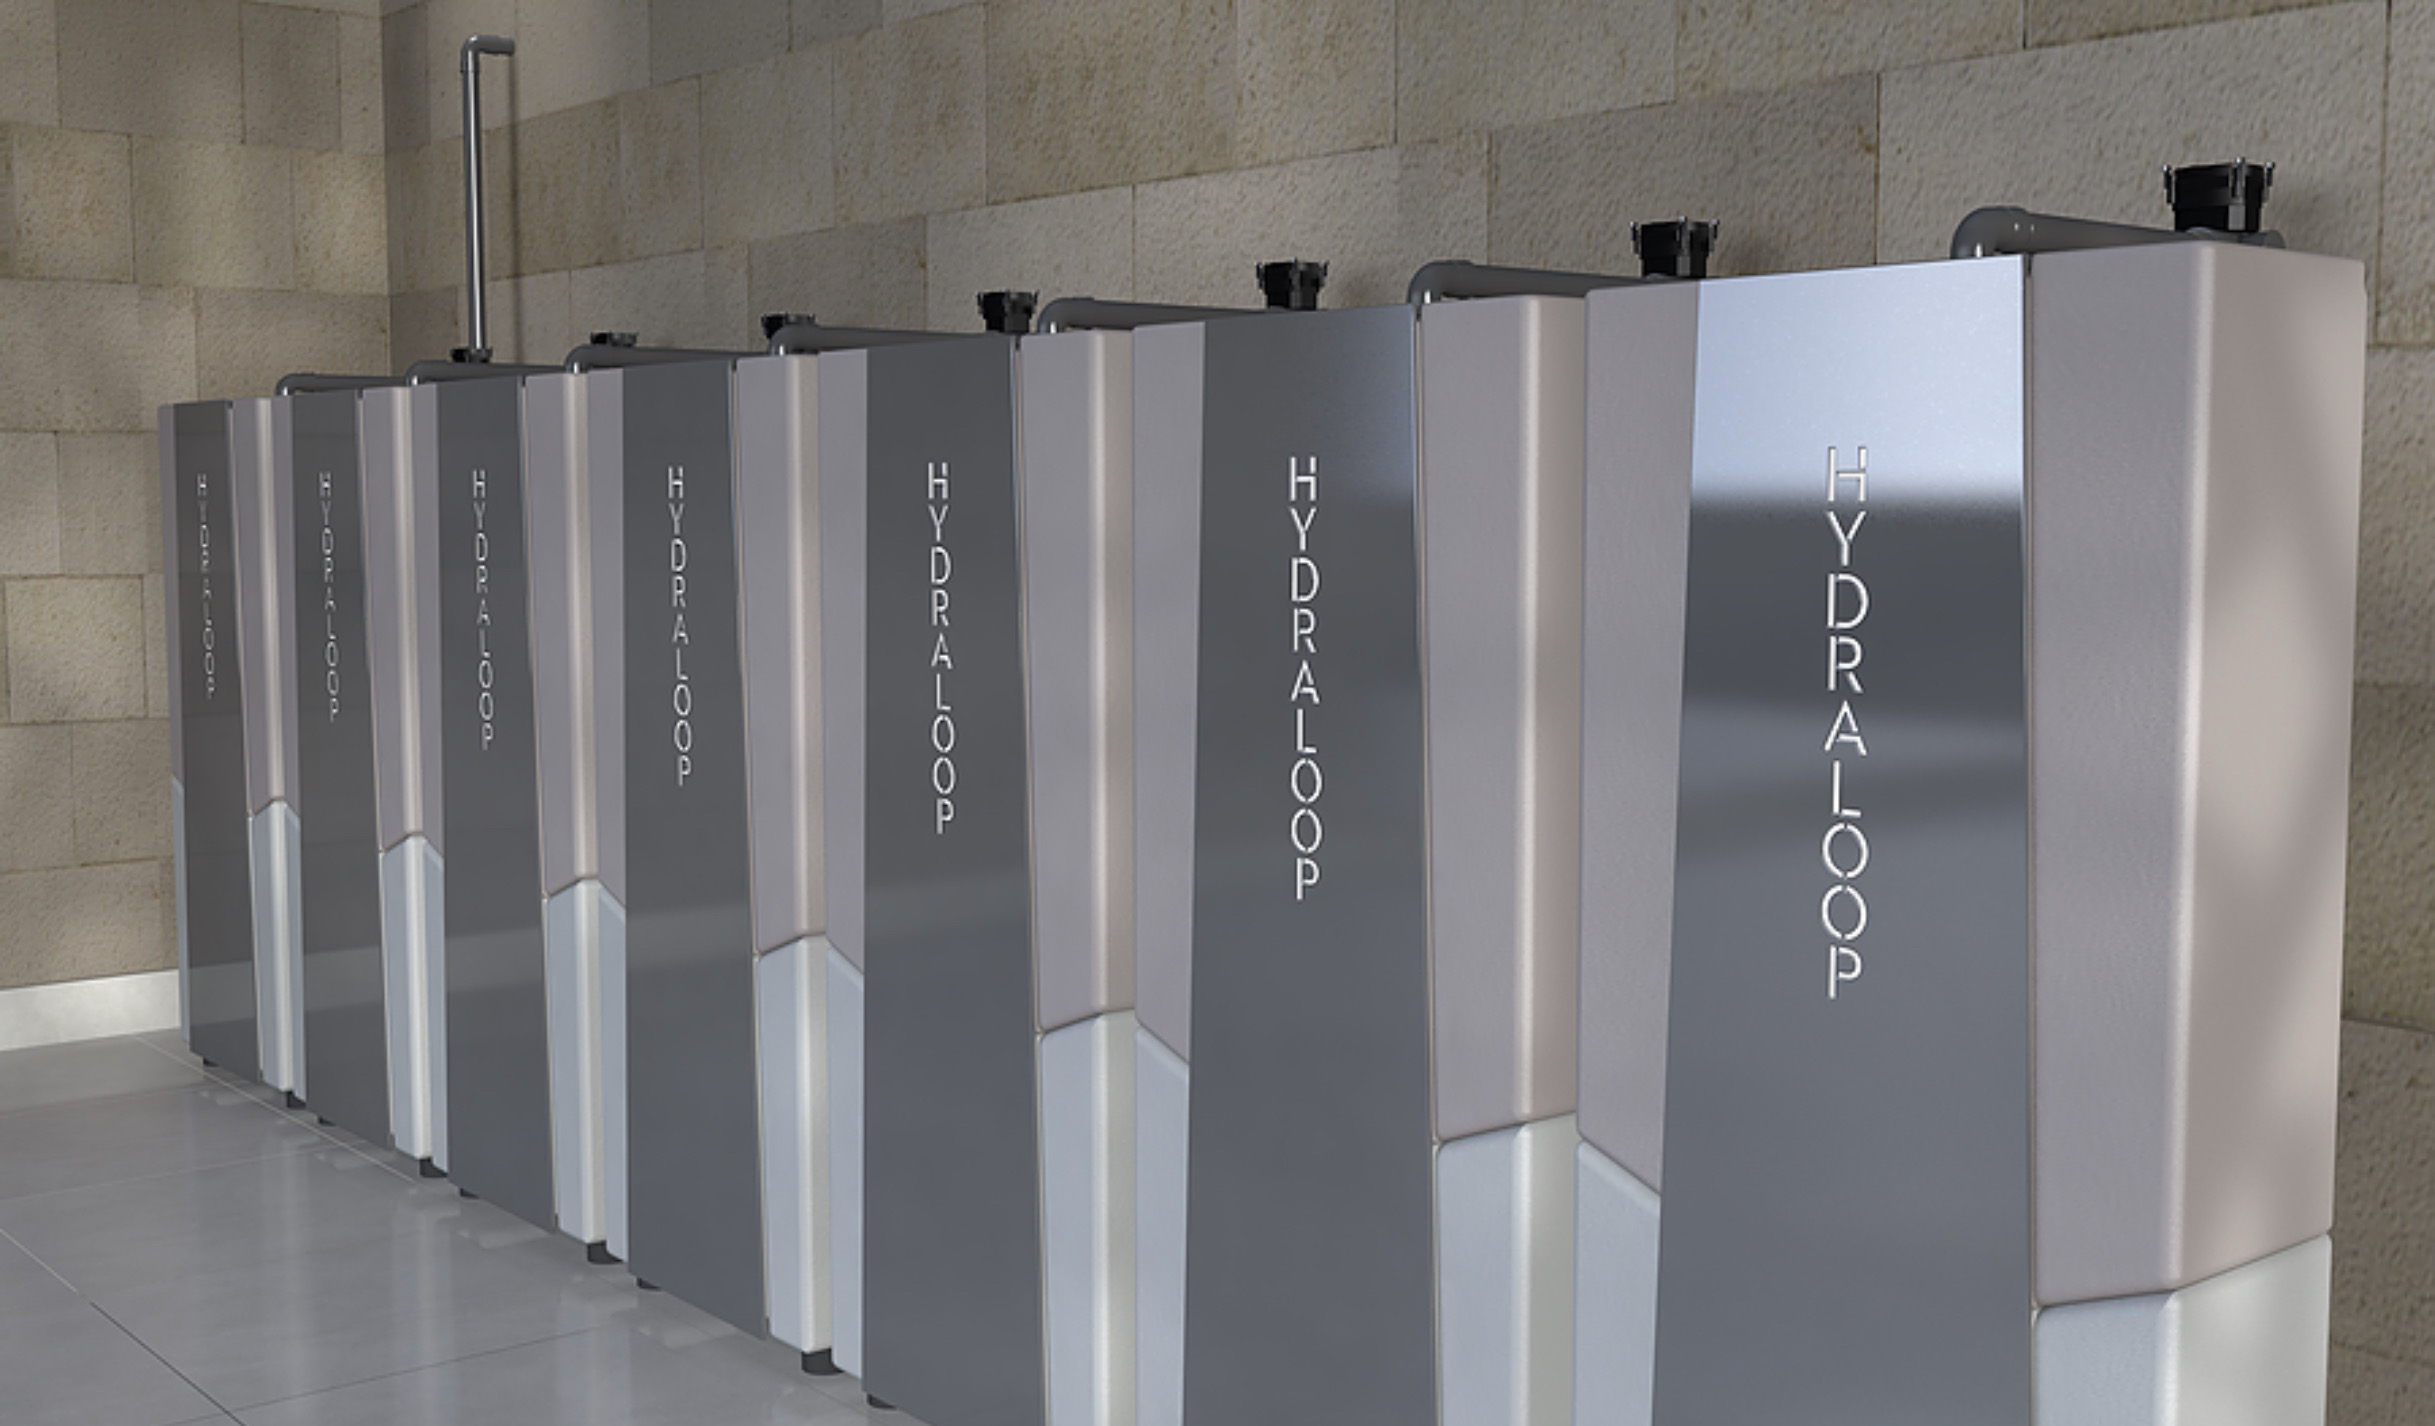 By installing a Hydraloop Cascade set-up in the main building of a hotel, centrally collected water from hand basins, baths and showers can be collected and reused for toilet flushing, garden irrigation and pool top up. With a Hydraloop Cascade the required capacity can easily be configured by the amount of Hydraloop units that are interconnected into one Hydraloop Cascade recycling plant. Hydraloop offer made to measure solutions for your project with a maximum water recycling capacity of 1.585 gallons/6000 liters day.